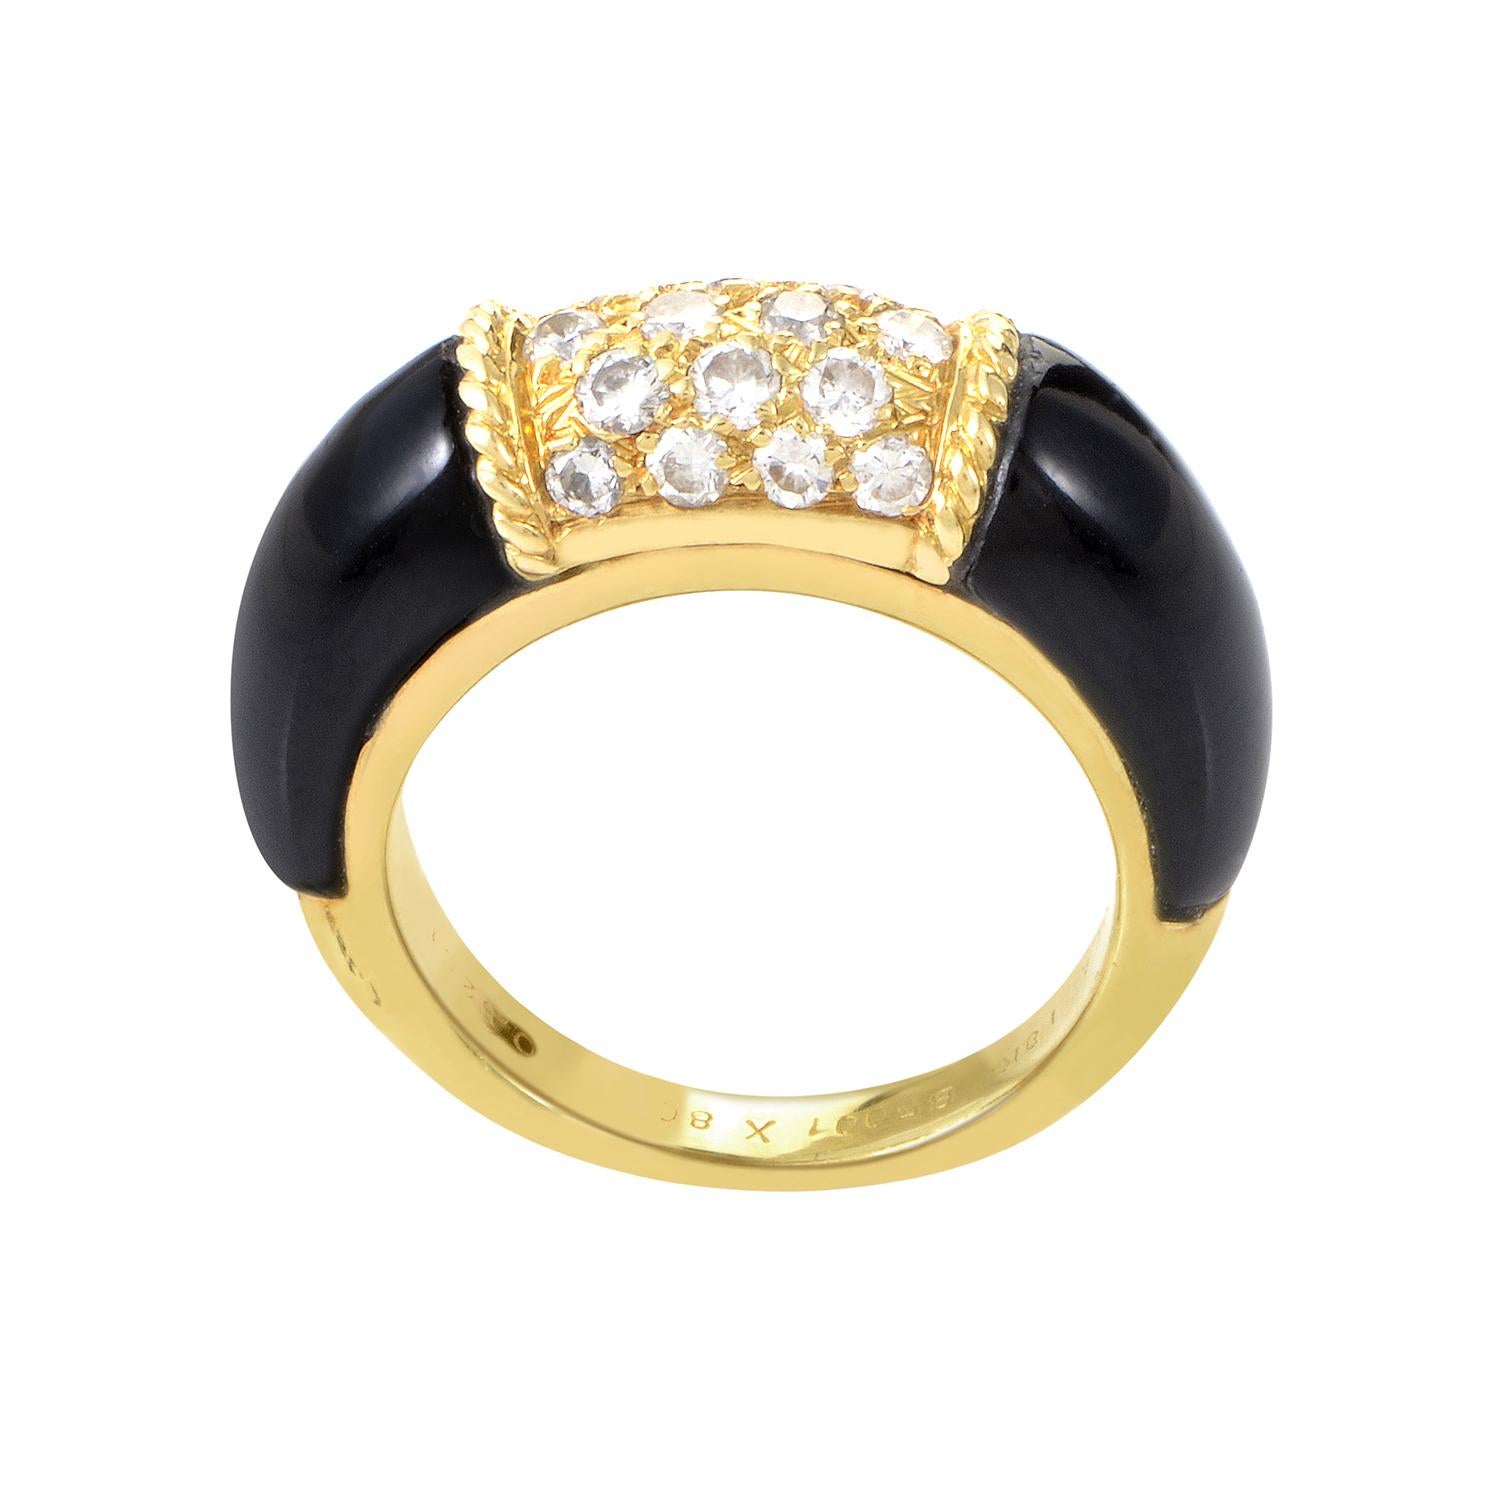 The gorgeous contrast of light and dark is truly divine in this design from Van Cleef & Arpels. The ring is forged from 18K yellow gold and features shanks set with glossy black onyx. Lastly, at the center of the design is a delicate pave of